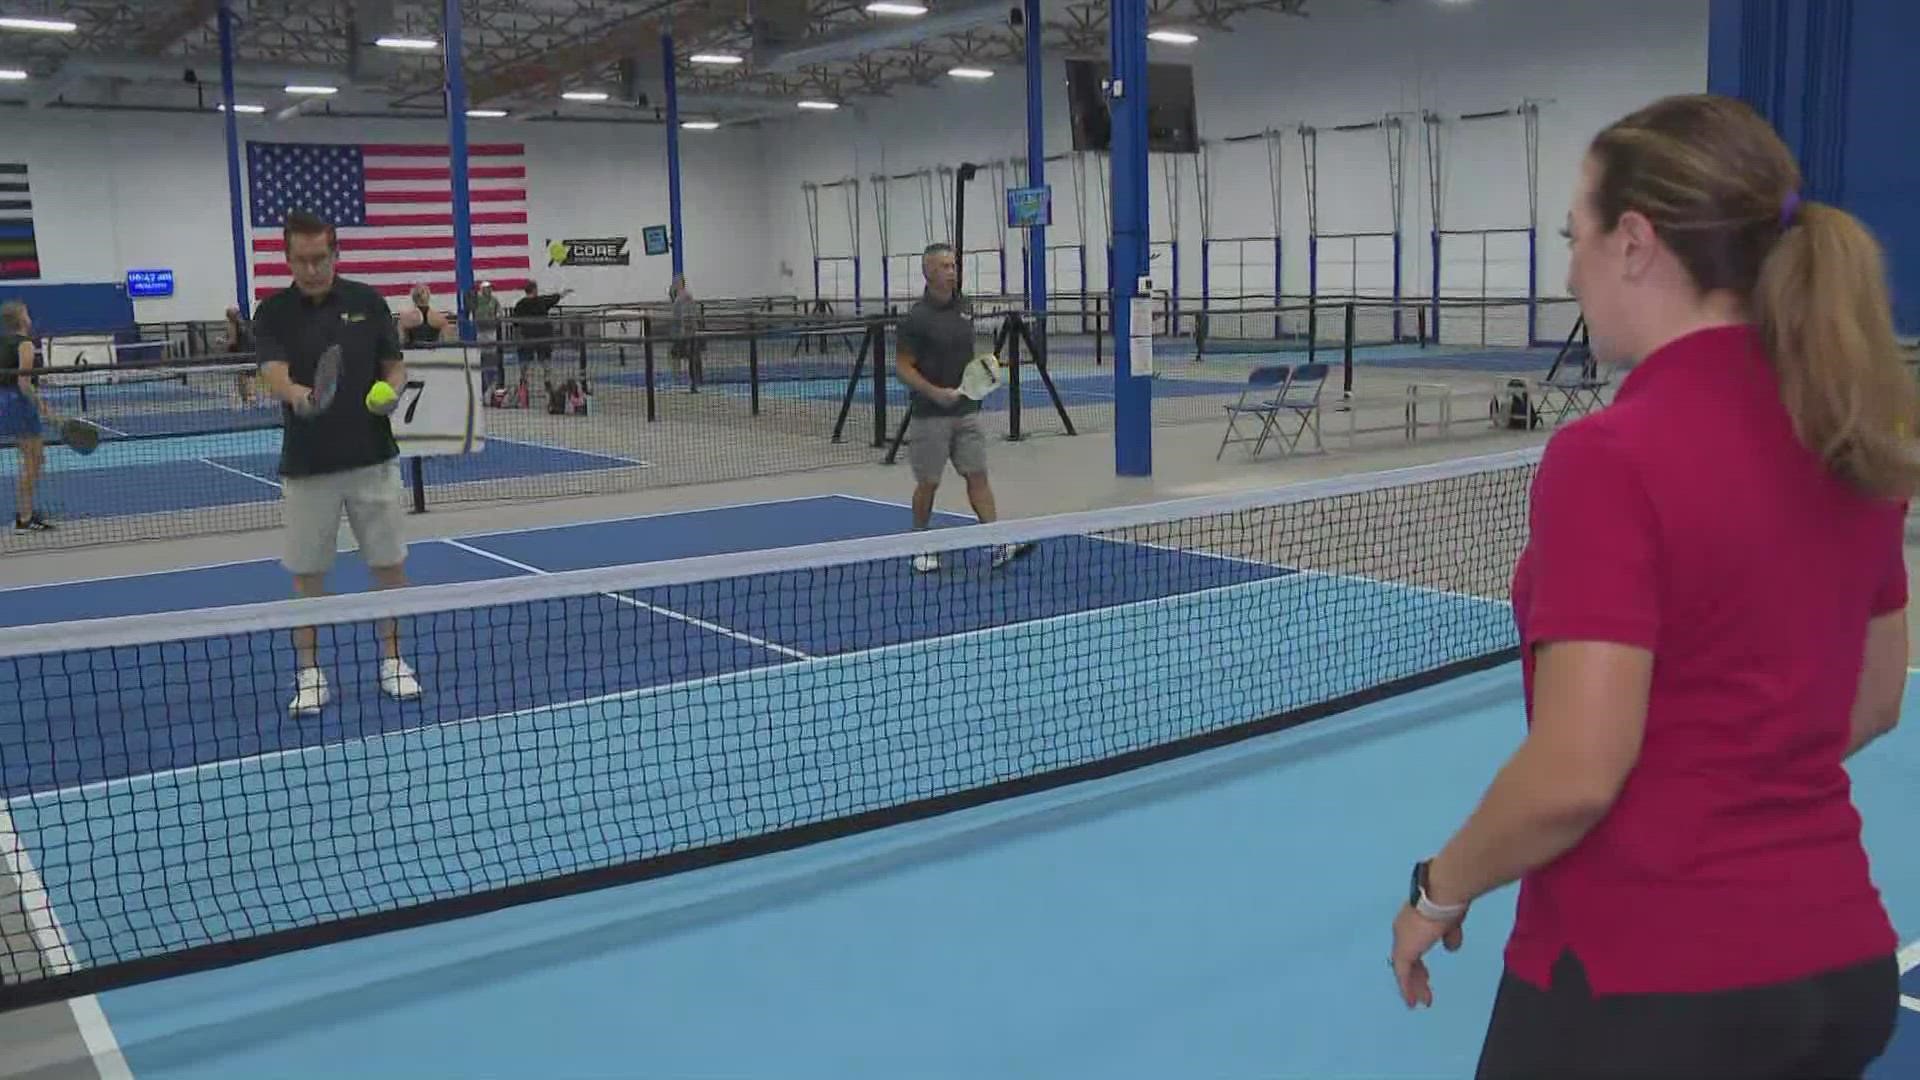 Pickleball is taking the world by storm and a Chandler man is turning the popular sport into a booming business. Jen Wahl has more on Pickleball Kingdom.